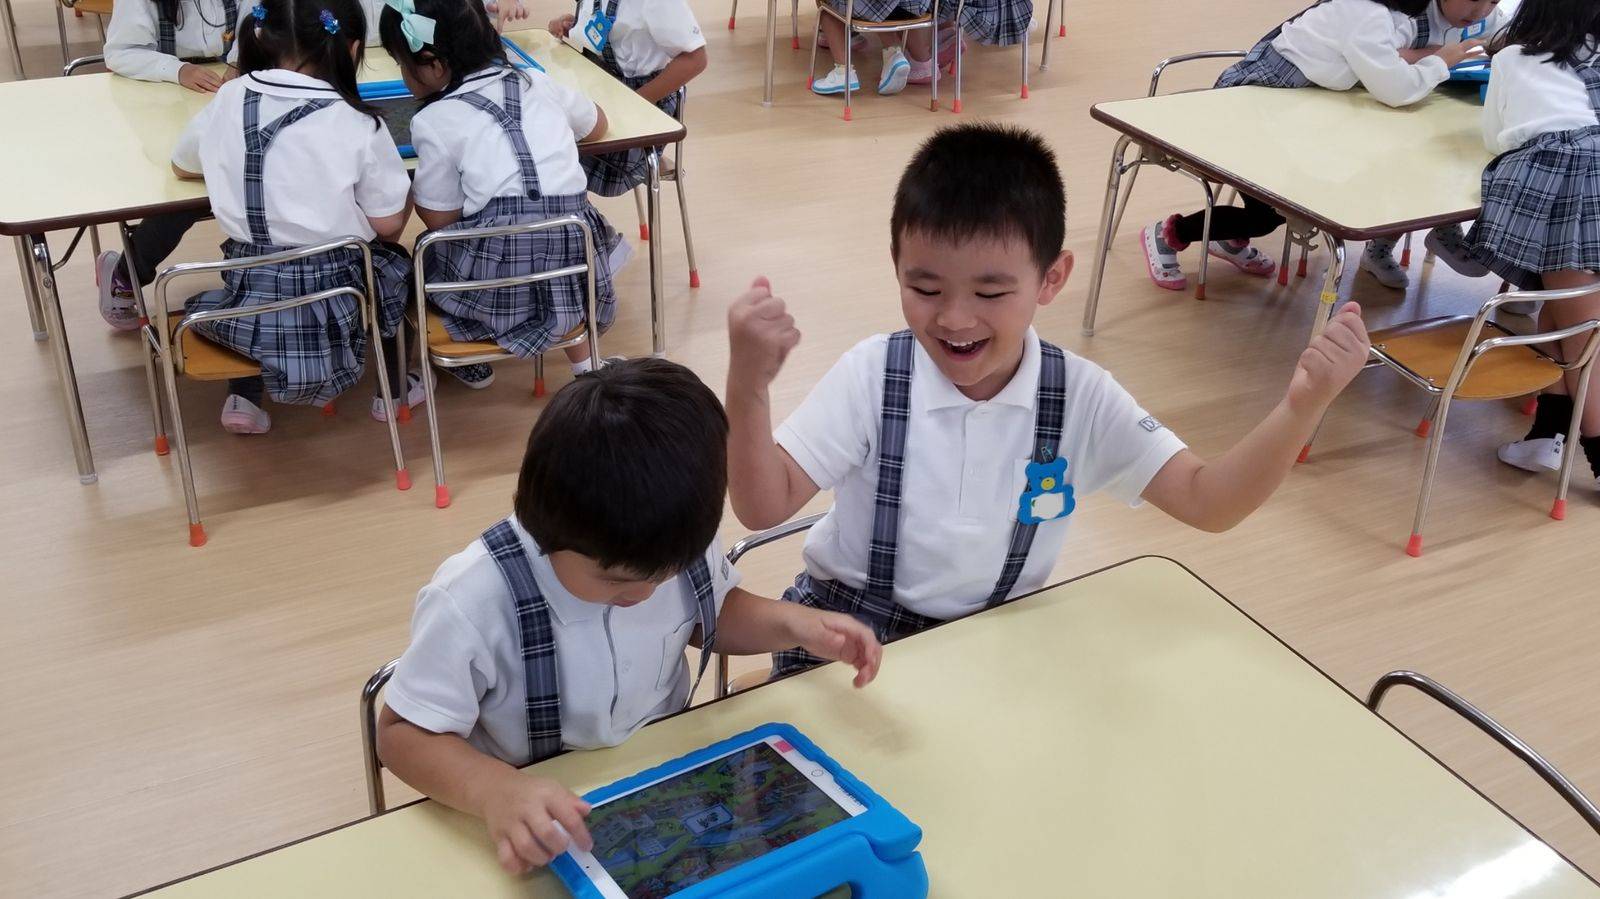 Online games connecting Japan's kids in pandemic era, but